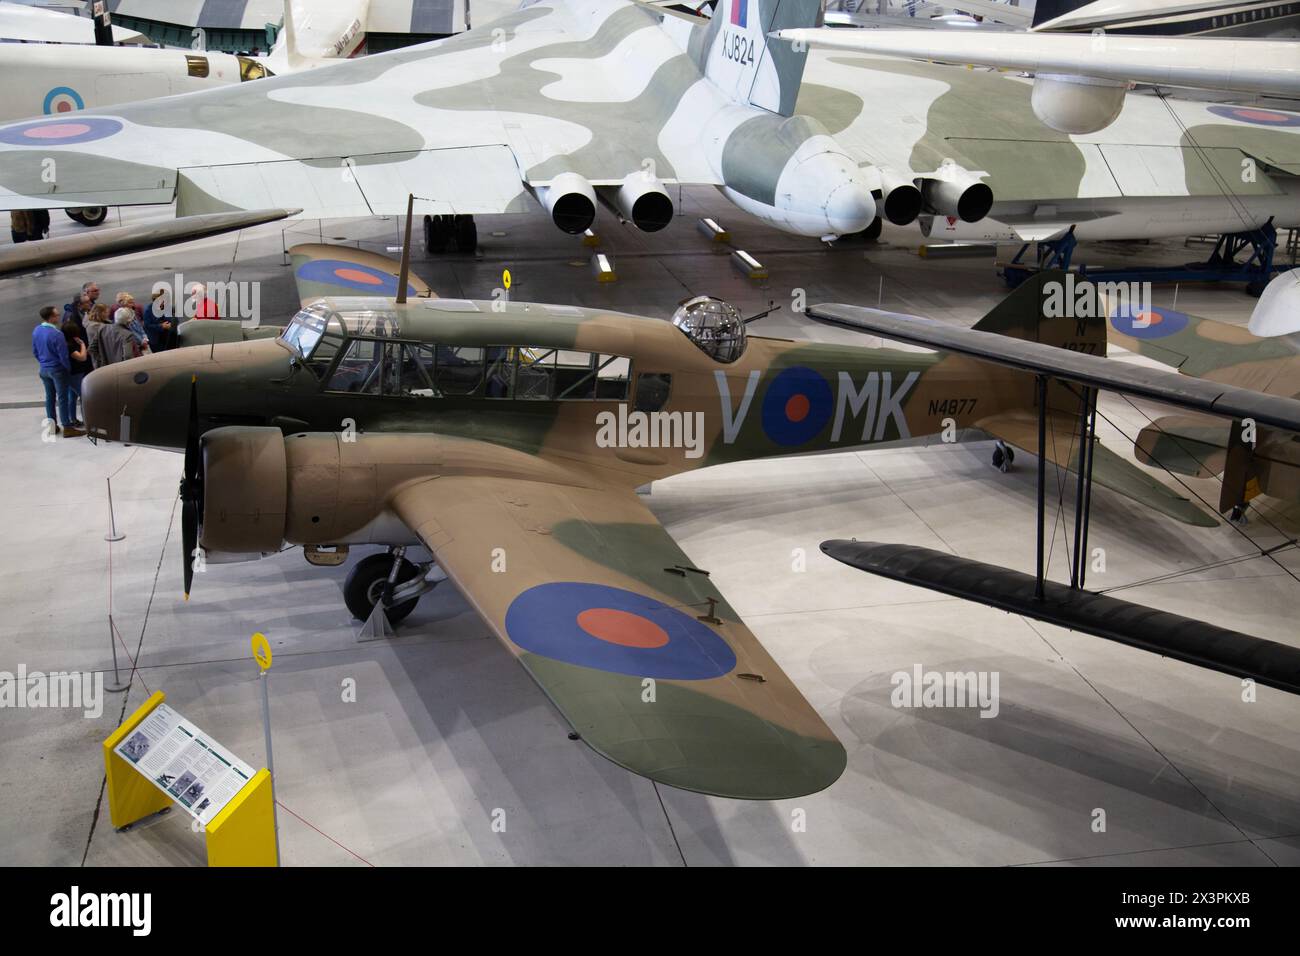 Avro Anson 1, a British twin-engine, multi-role aircraft served in a variety of roles for the RAF, Fleet Air Arm and Royal Canadian Air Force. Stock Photo